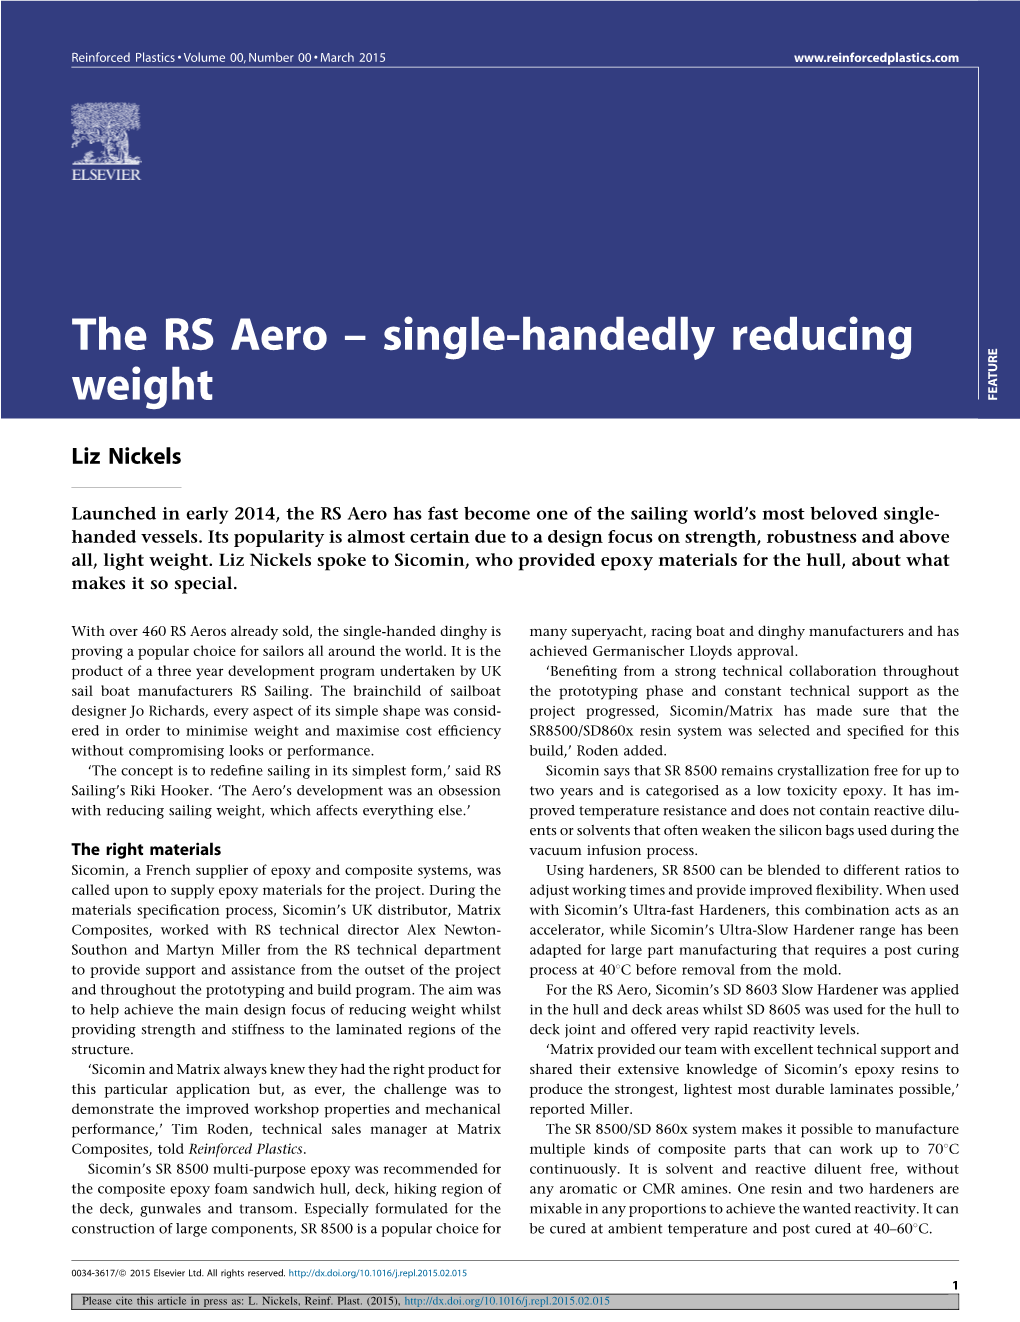 The RS Aero – Single-Handedly Reducing